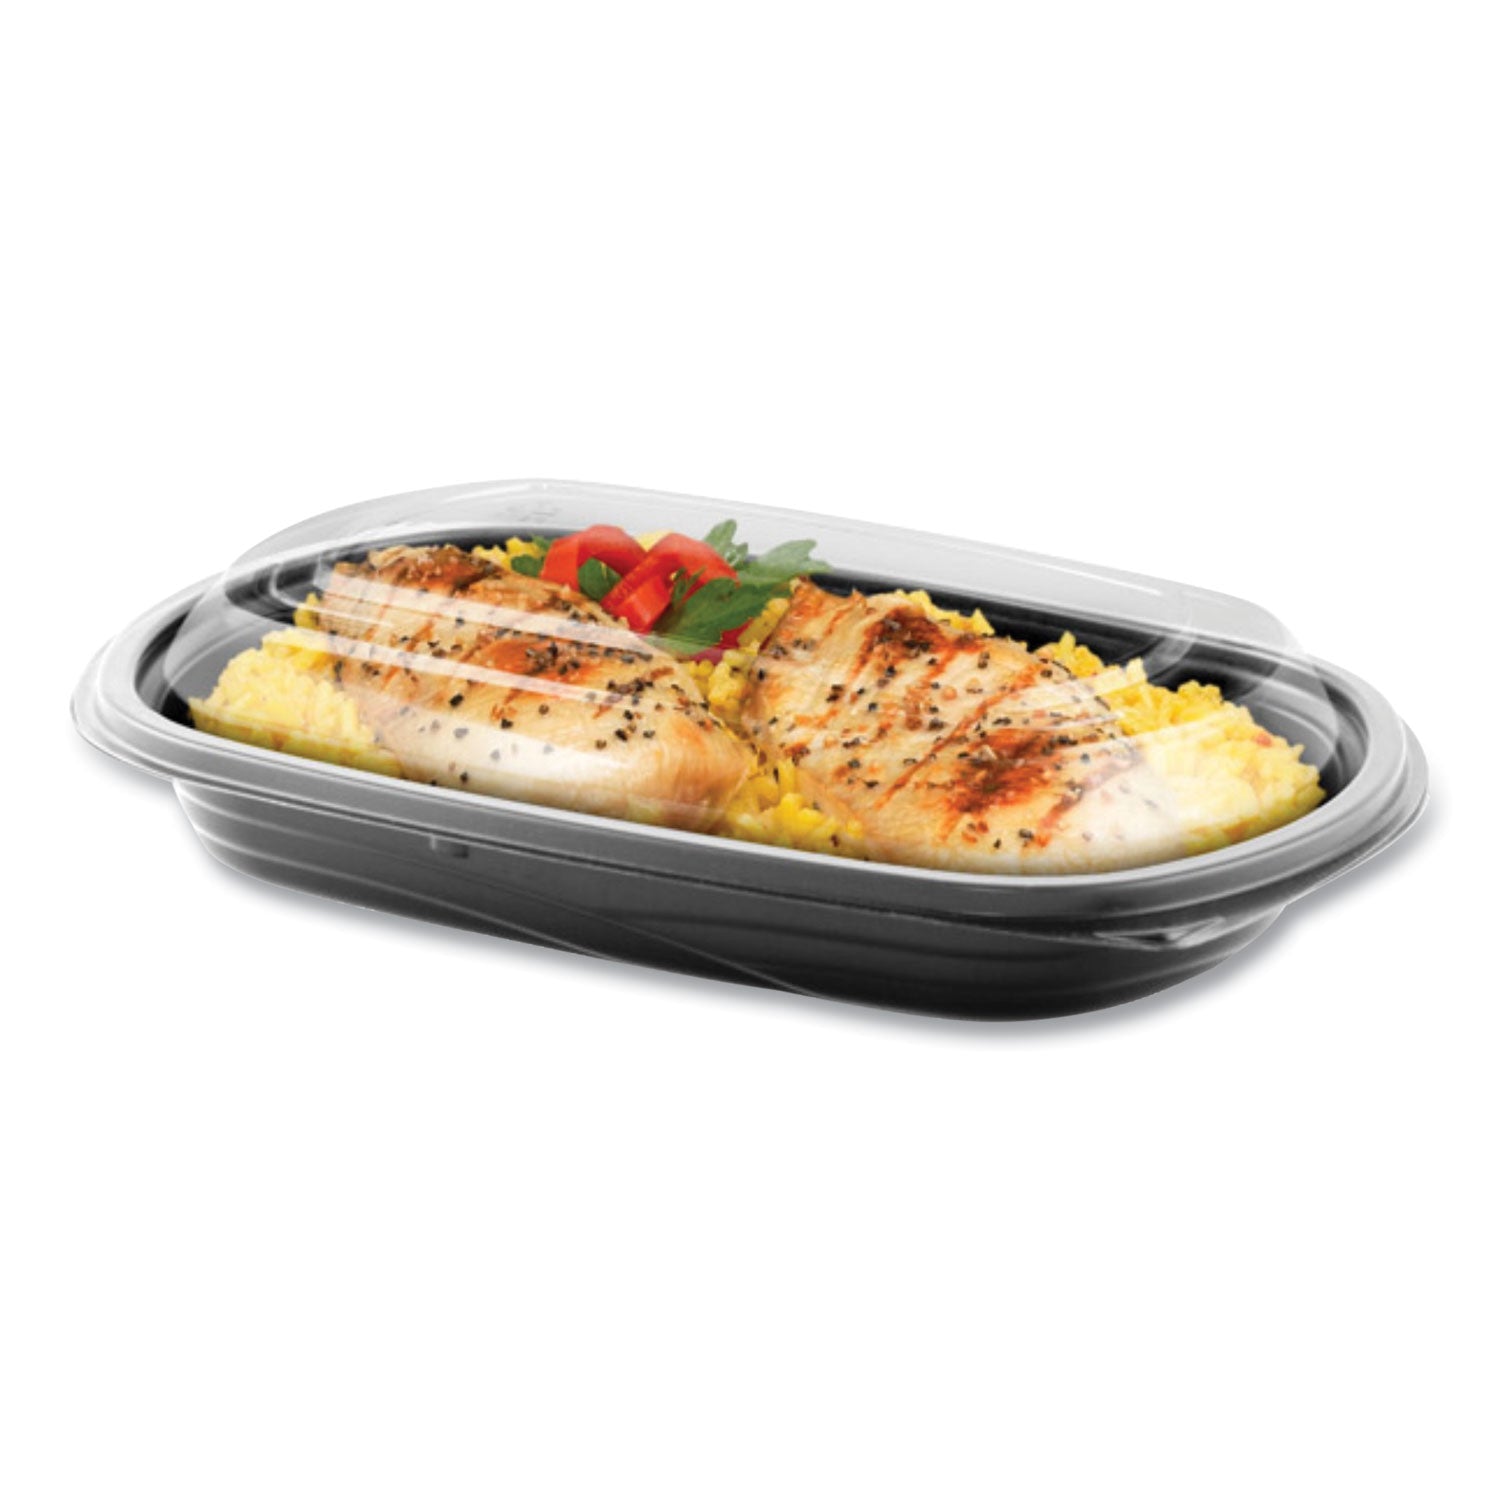 microraves-wave-container-and-dome-lid-combo-16-oz-635-x-879-x-172-black-clear-plastic-250-carton_anz4111603 - 1